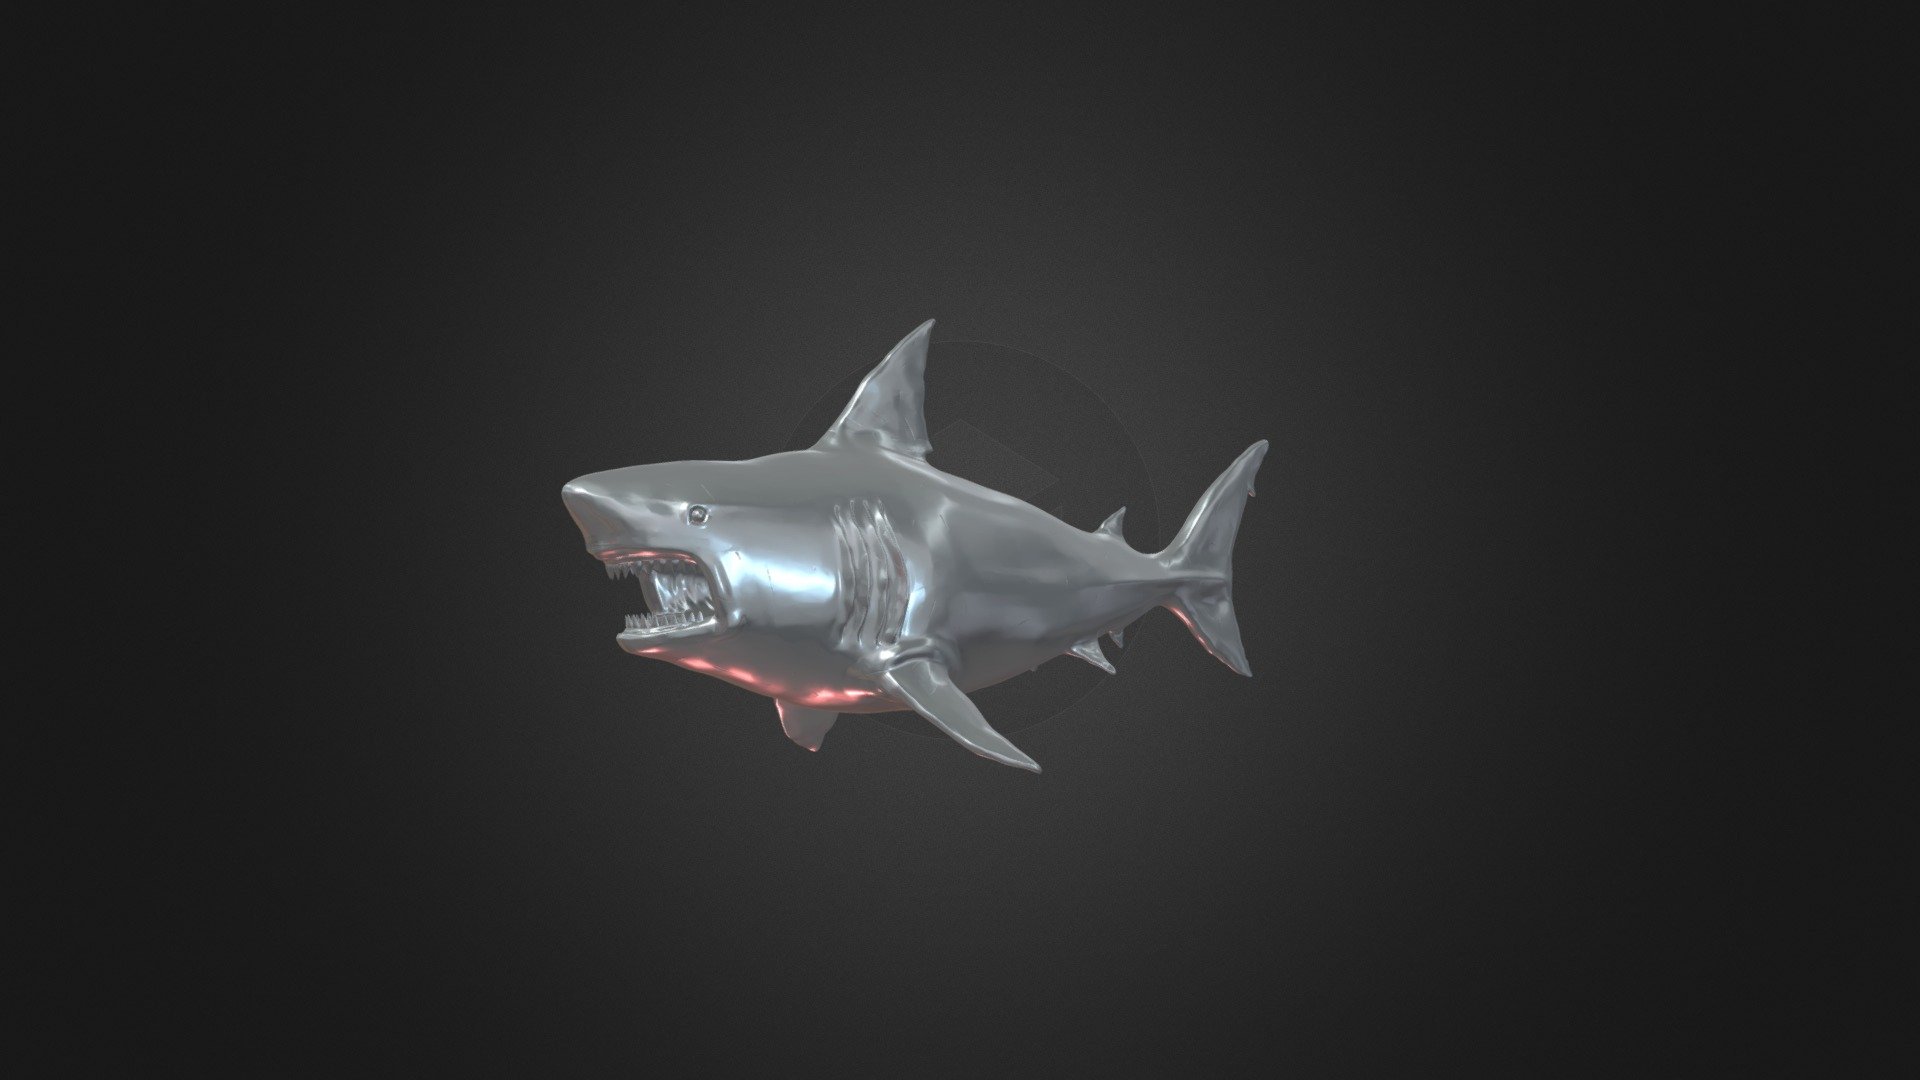 Sharks are a group of elasmobranch fish characterized by a cartilaginous skeleton, five to seven gill slits on the sides of the head, and pectoral fins that are not fused to the head. Modern sharks are classified within the clade Selachimorpha and are the sister group to the Batoidea 3d model